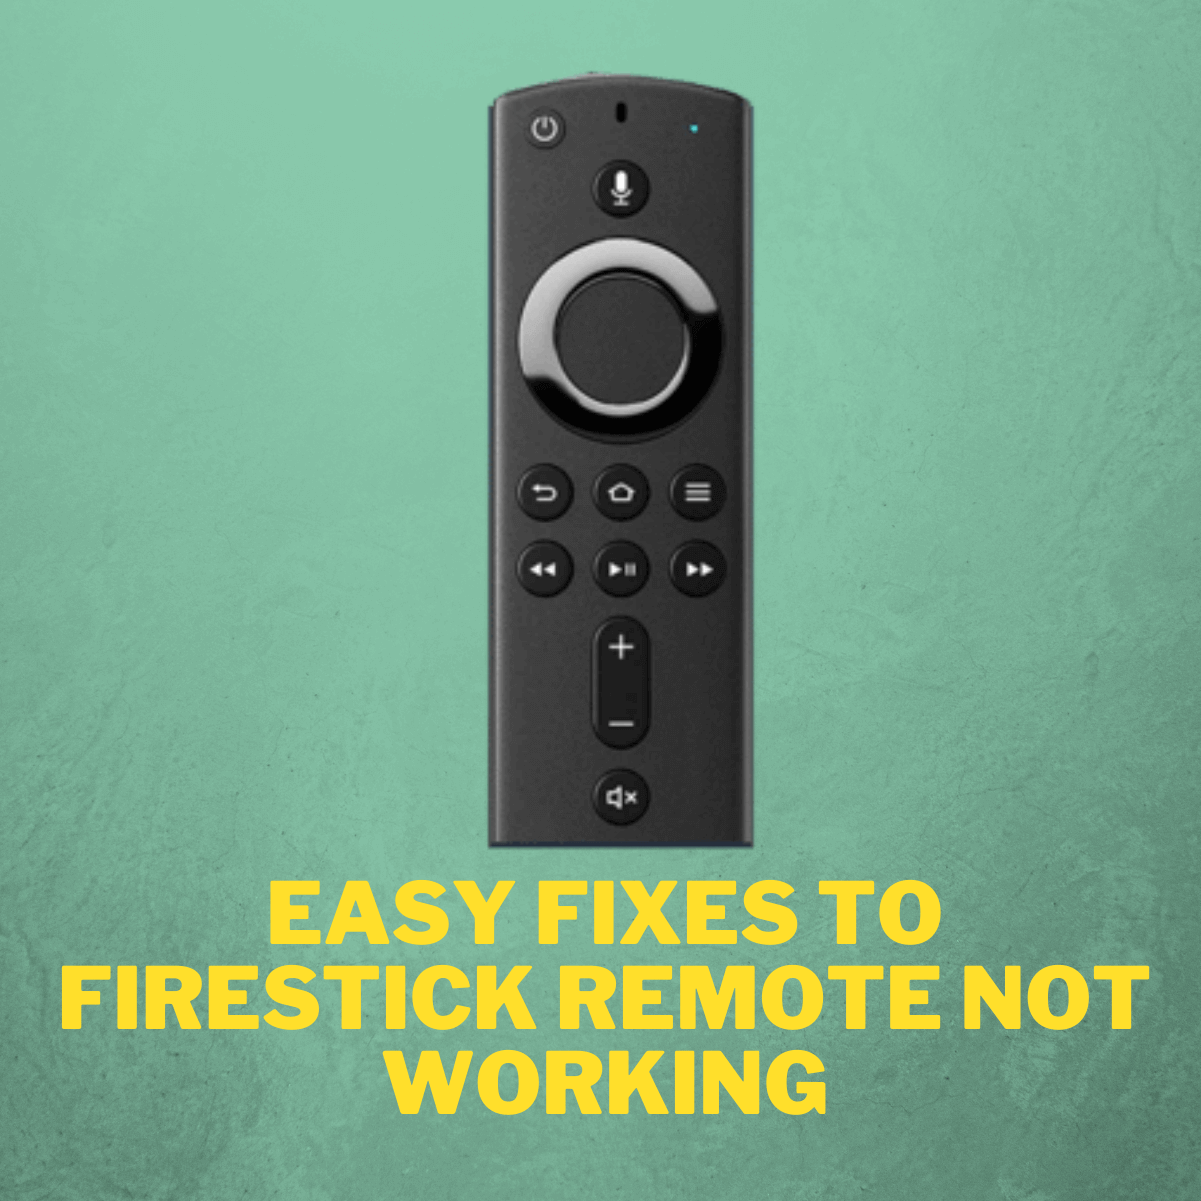 Firestick Remote Not Working Problems Resolved In 2 Mins